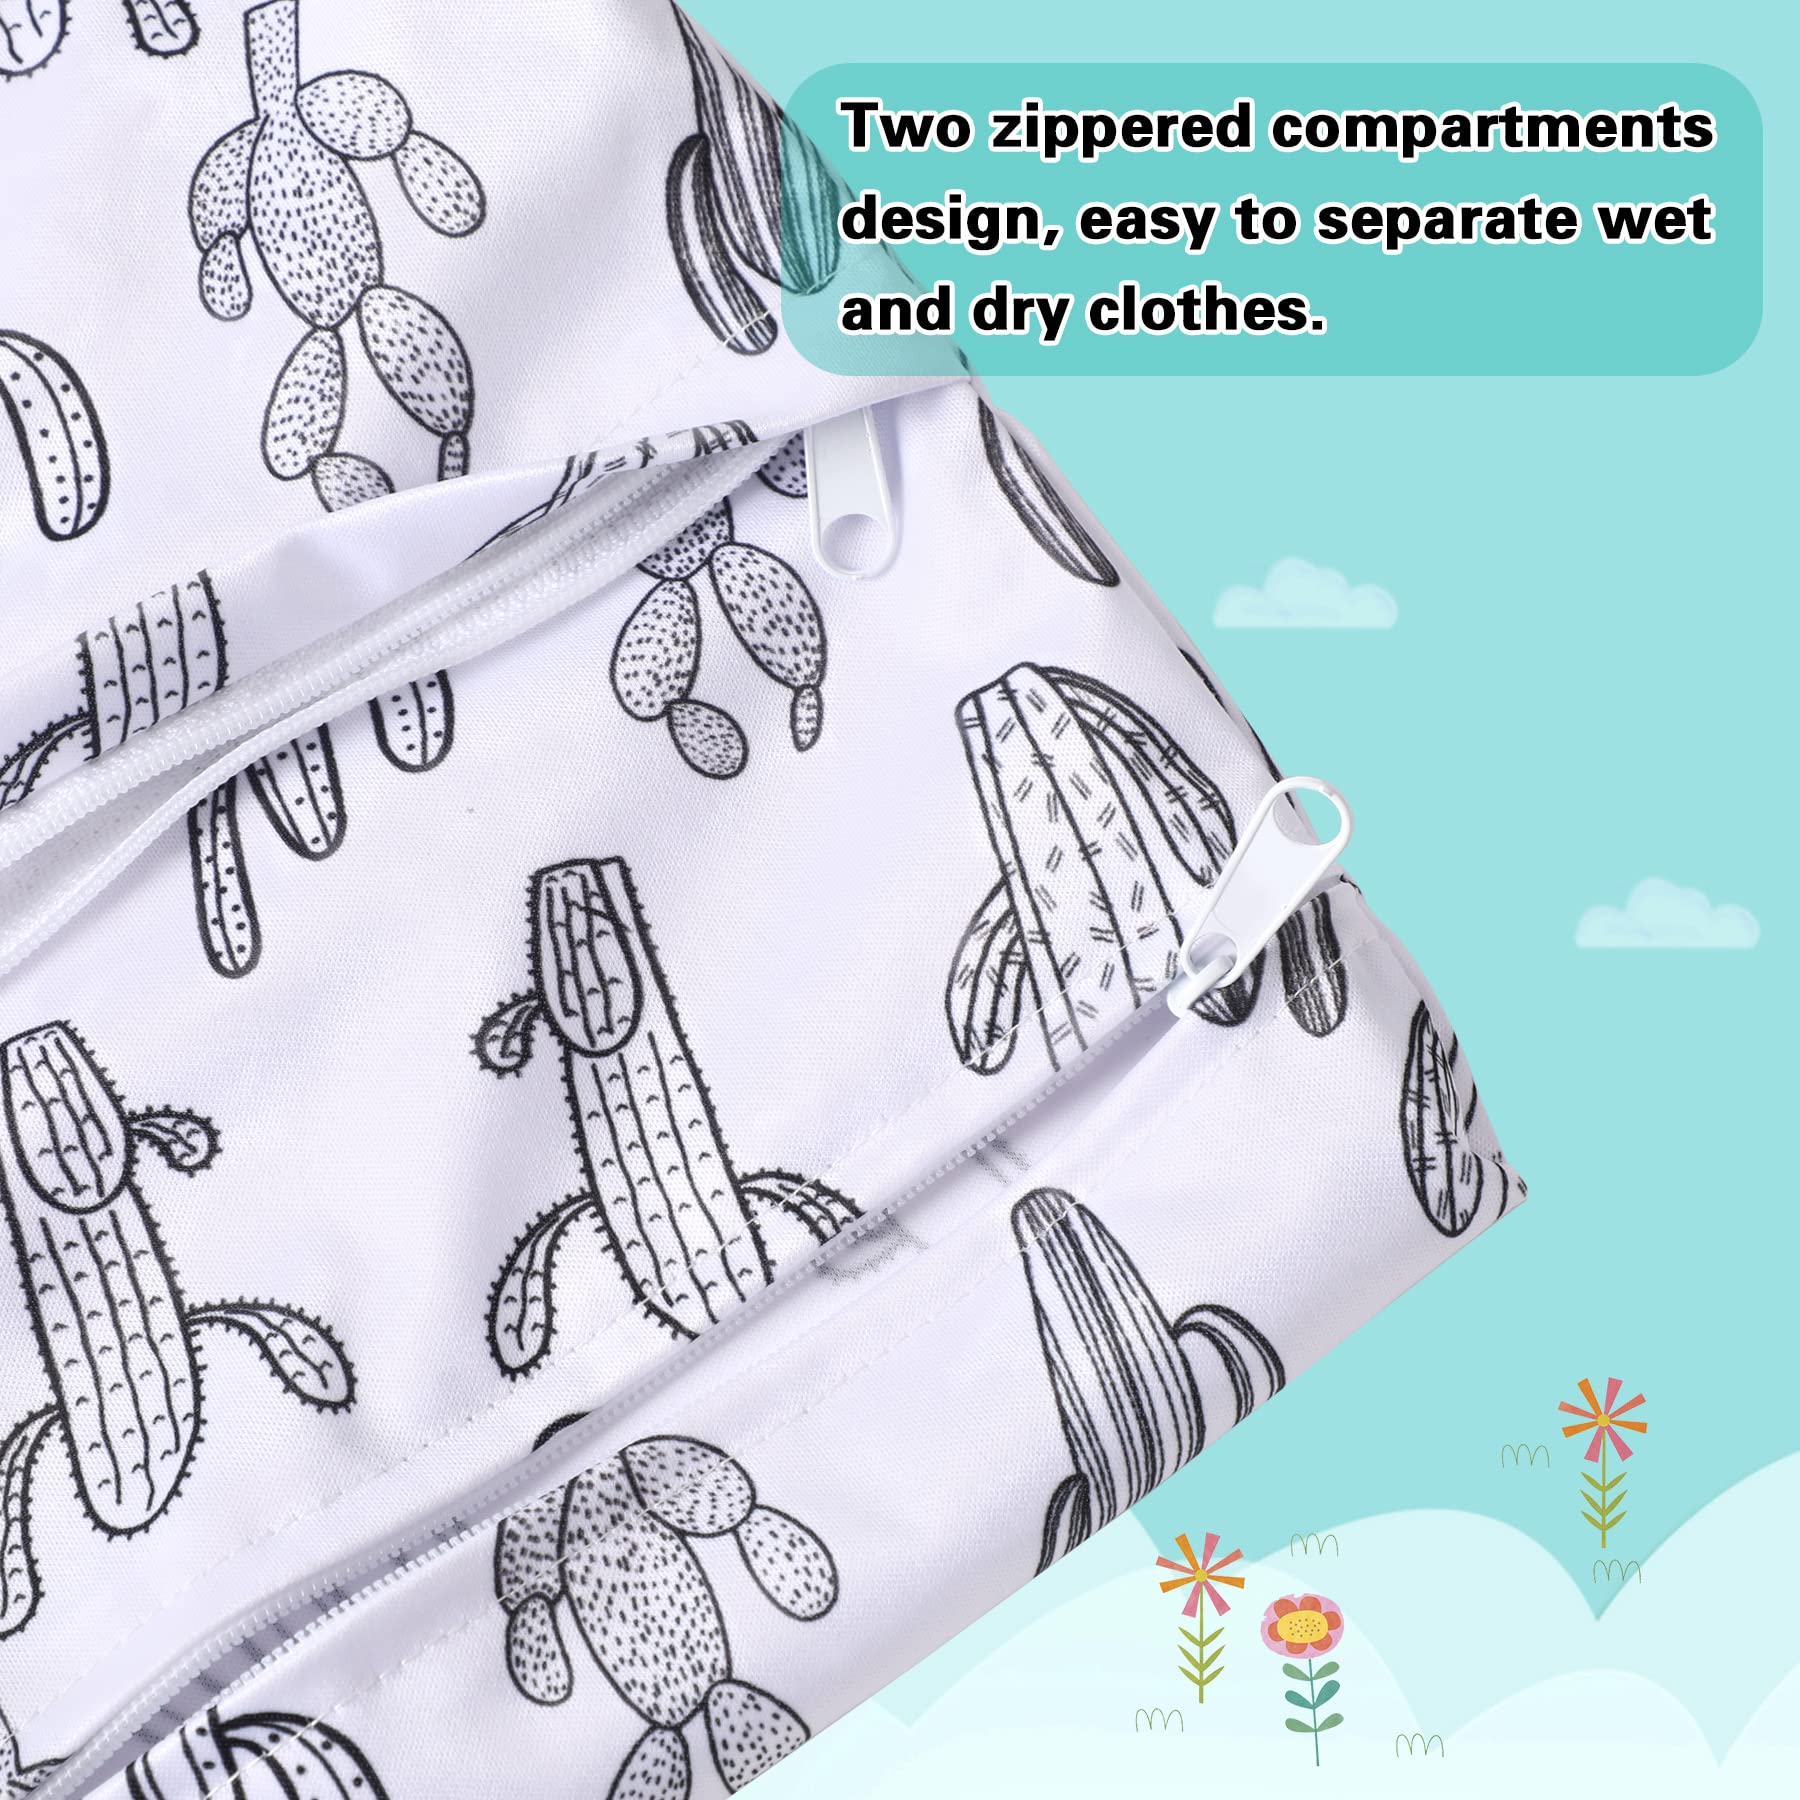 SANNIX 2Pcs Wet Dry Bags for Baby Cloth Diapers Washable Cactus Travel Beach Pool Yoga Gym Bag with Two Zippered Pockets for Toiletries Swimsuits Wet Clothes